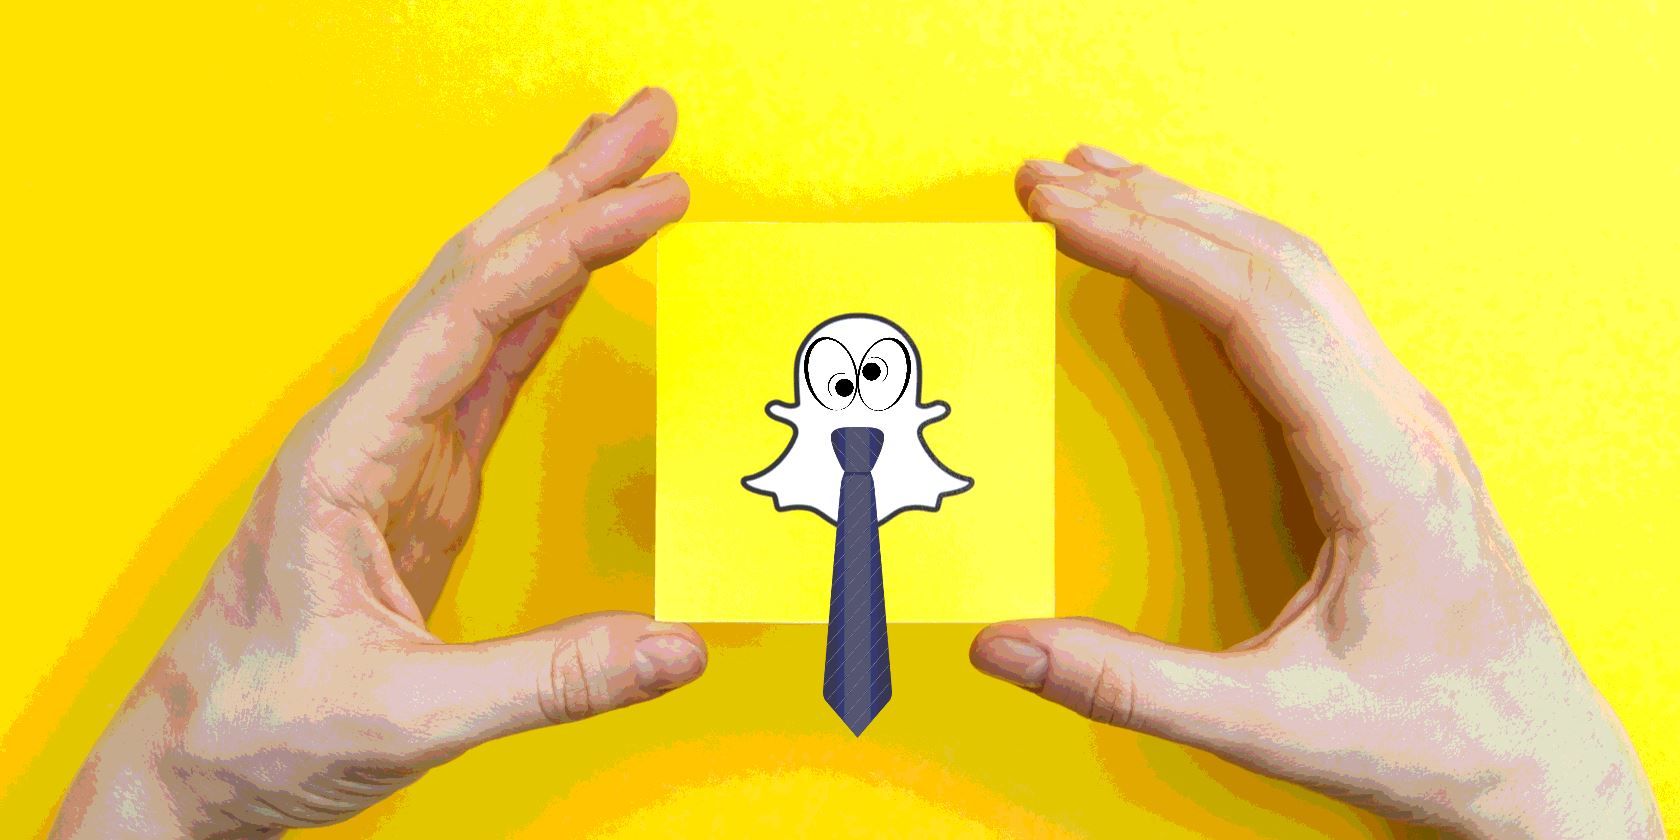 The Best Snapchat Filters List and Essential Snapchat Lenses